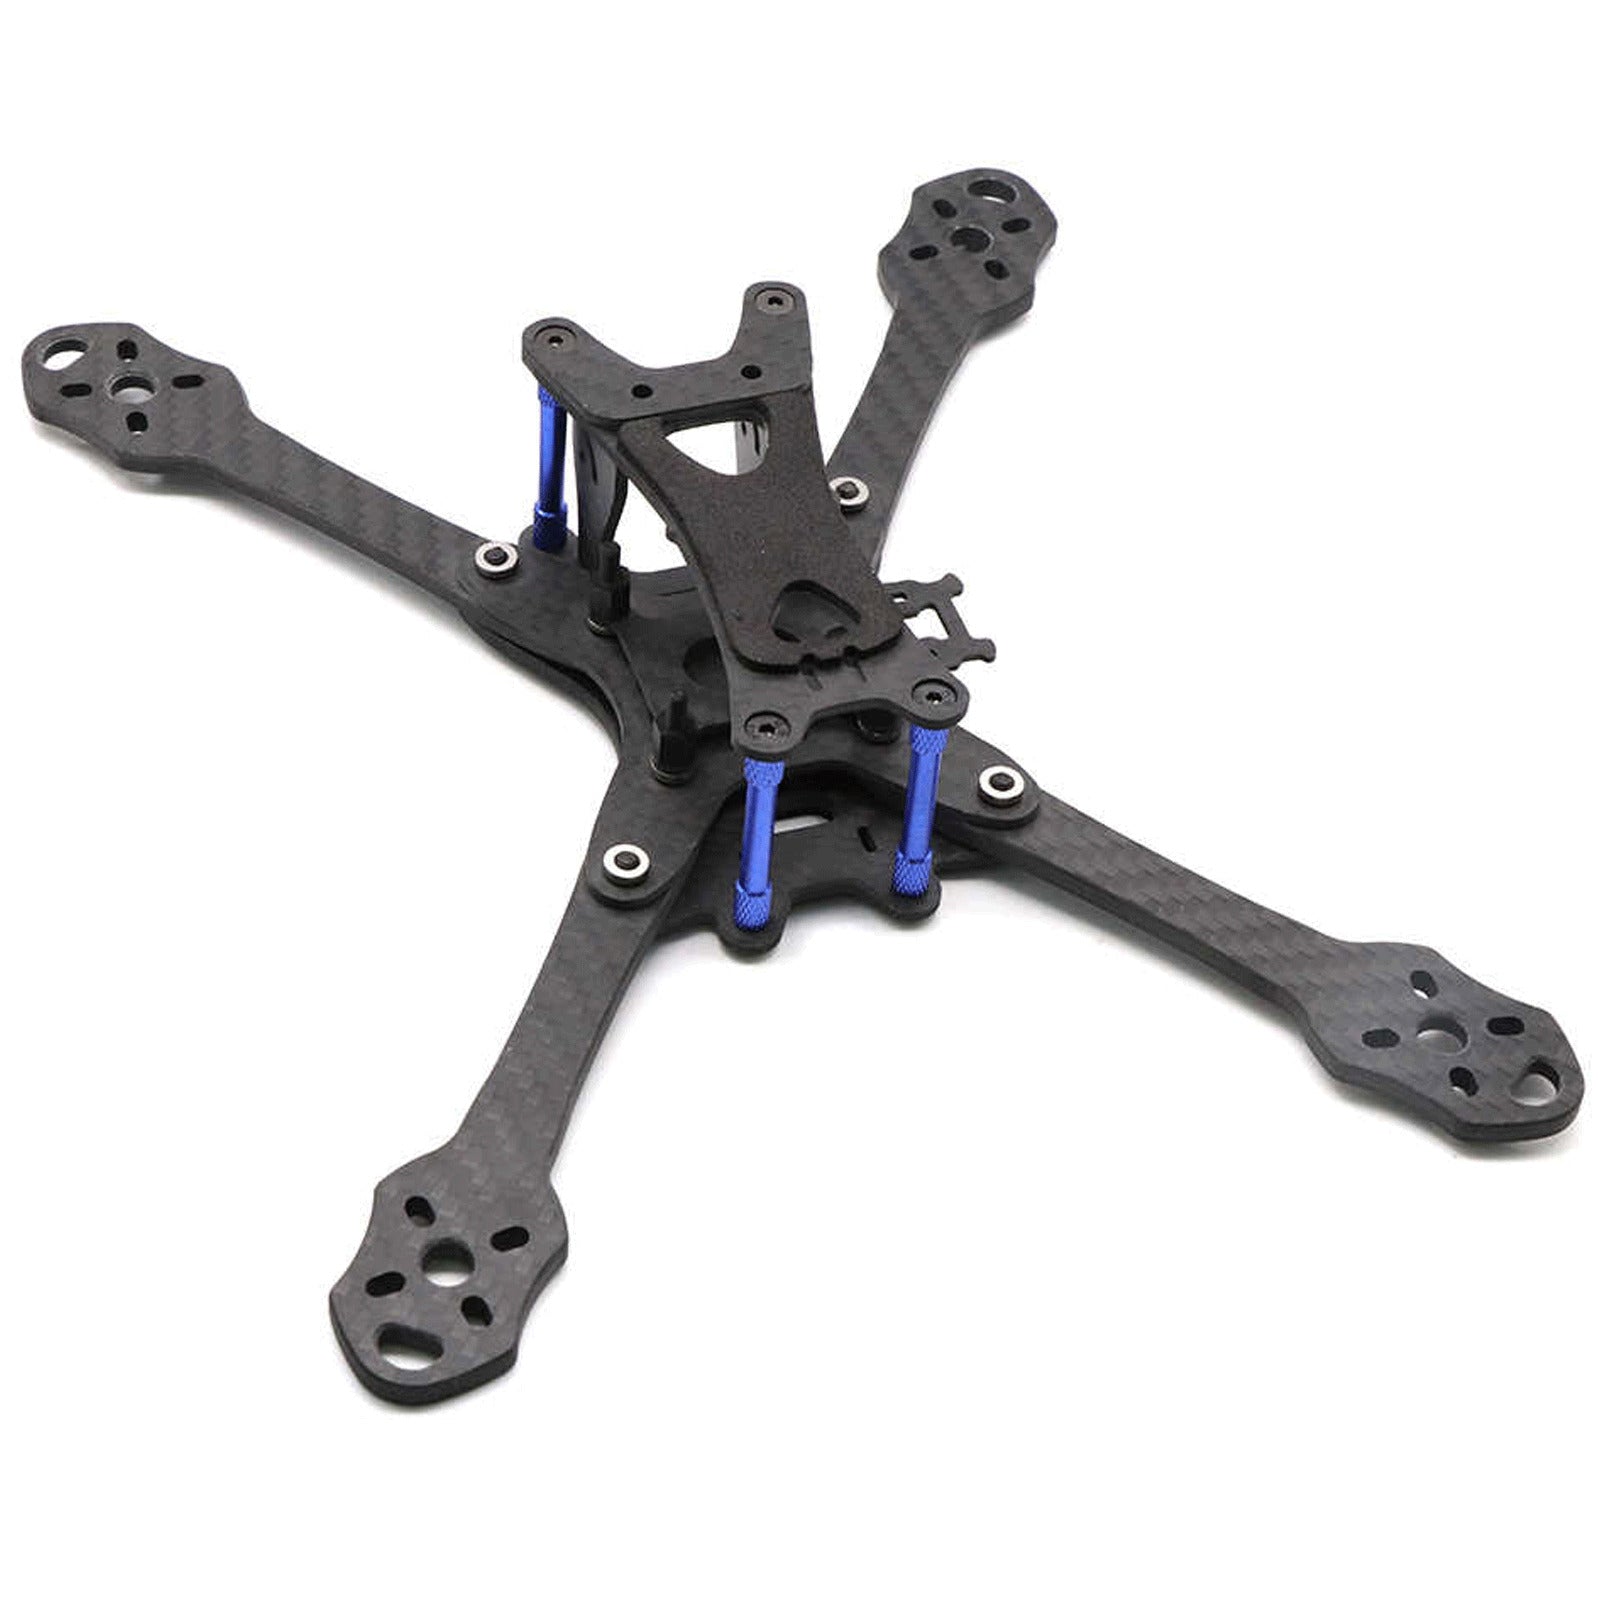 FPV Drone Racing Frames - FinzFPV Fly Different - Drone Racing FPV Frame